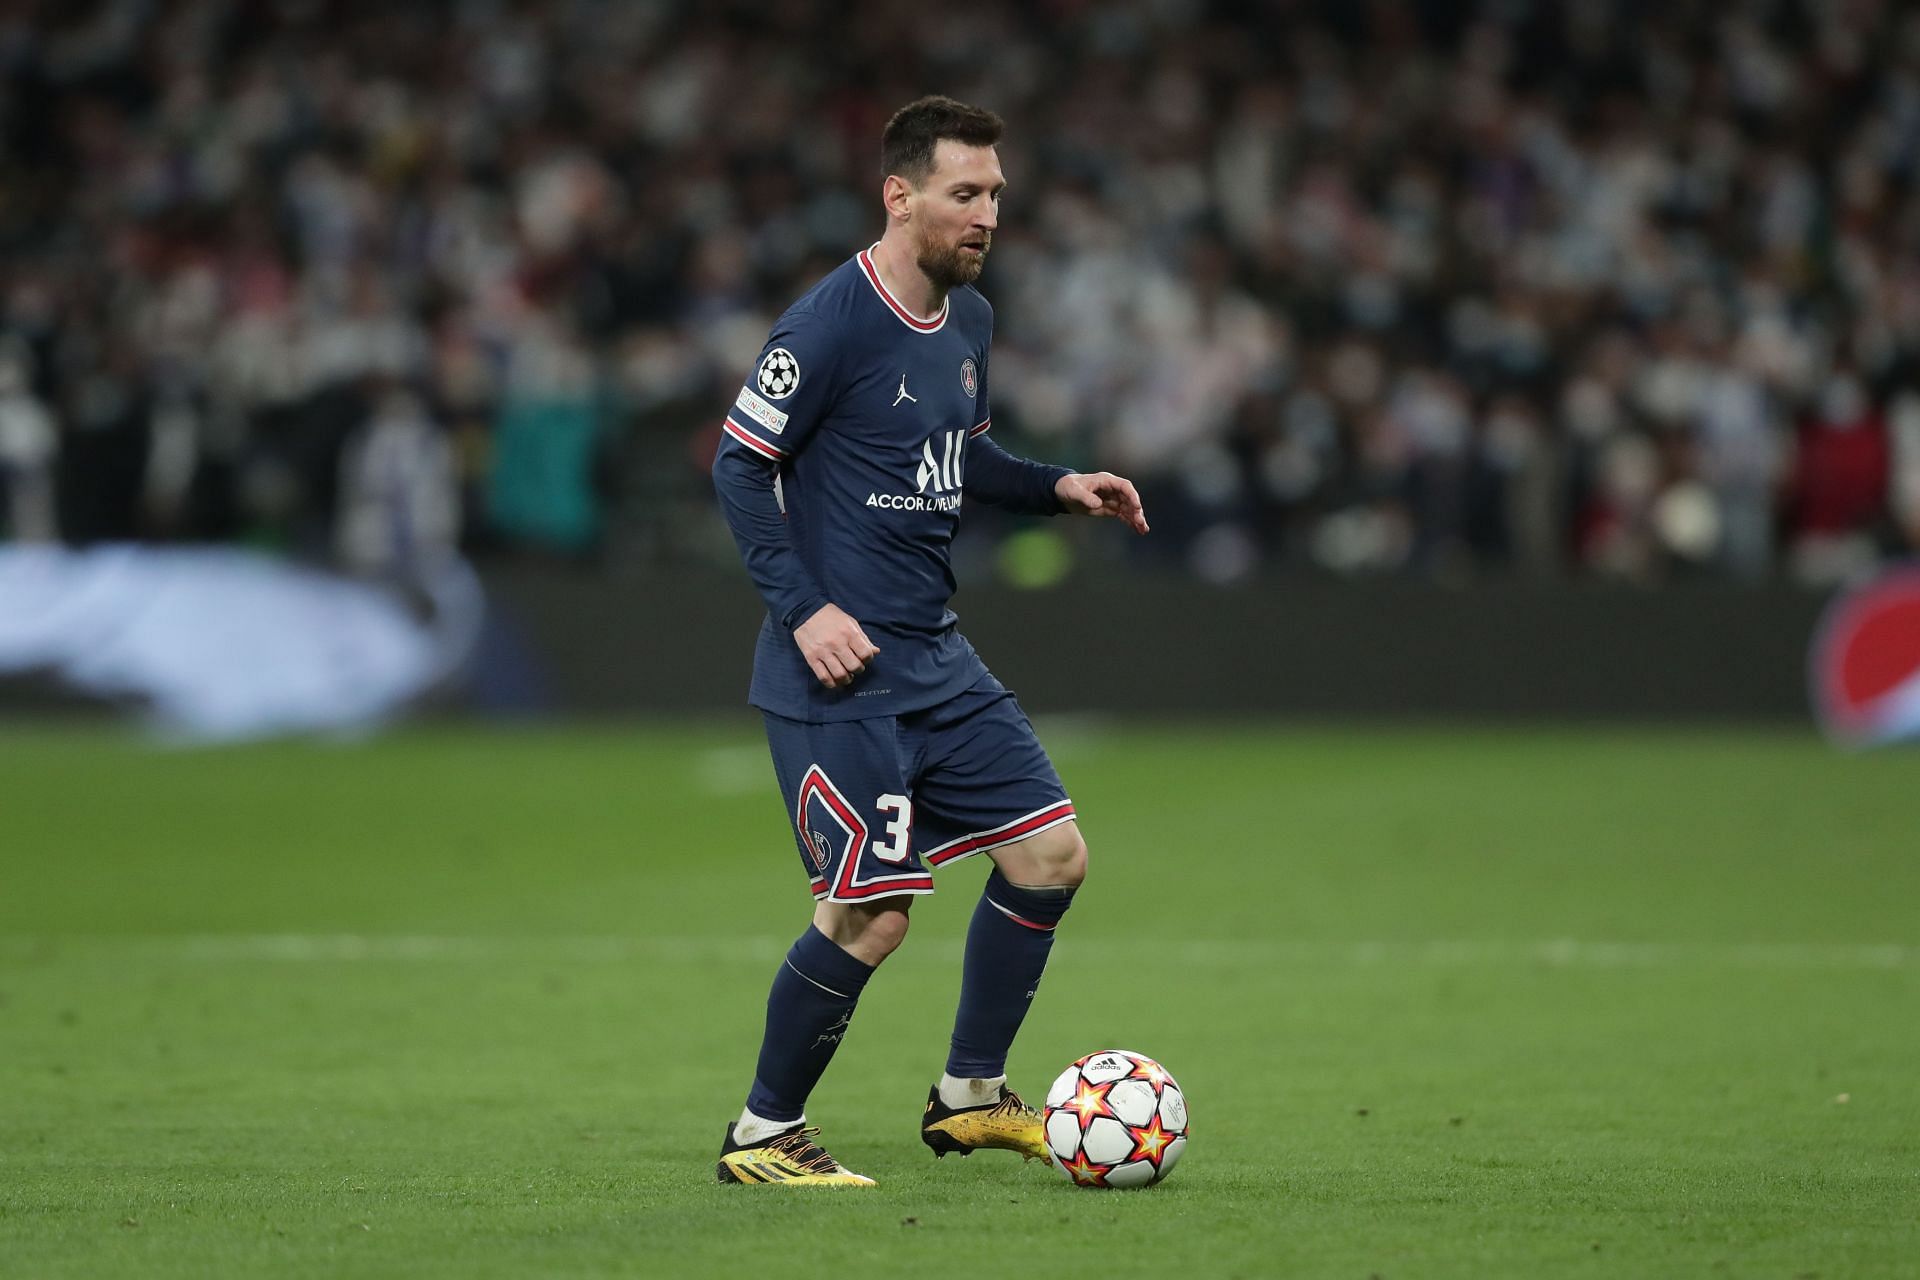 Lionel Messi has had a difficult debut season in Ligue 1.